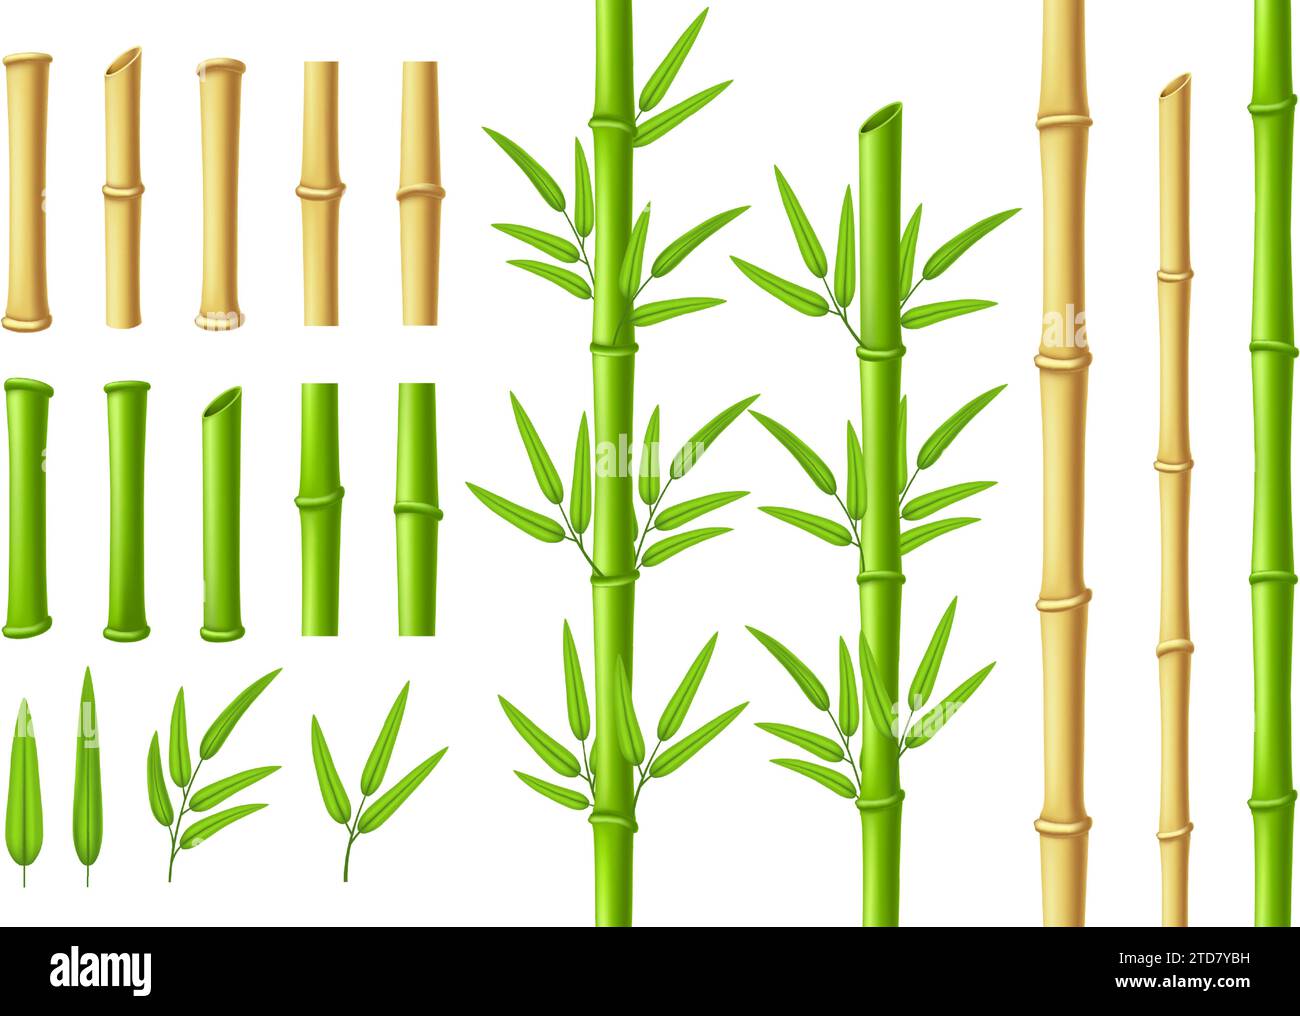 Brown bamboo stick with green leaves in sketch style isolated on